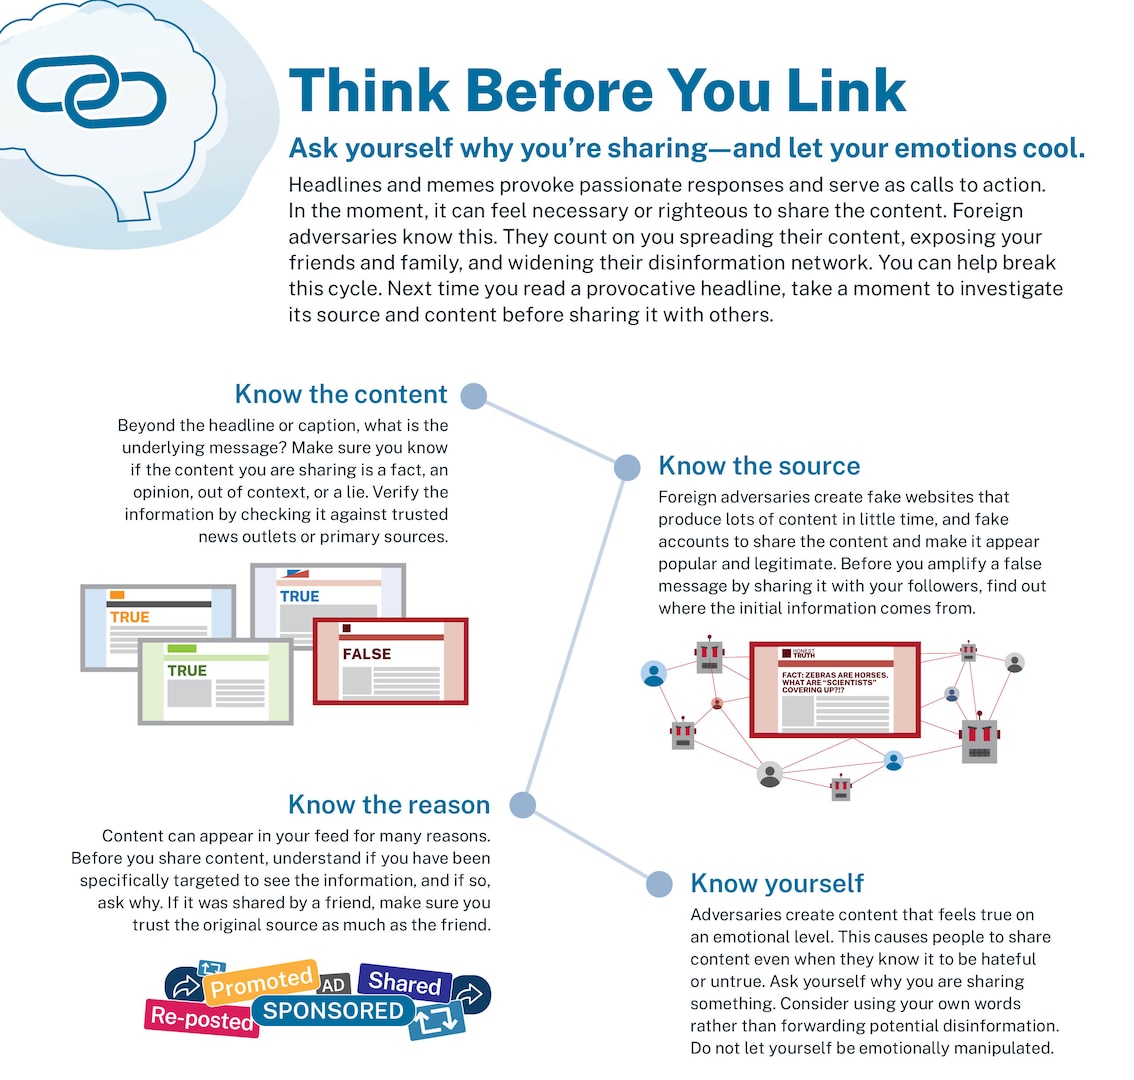 A "Think before you link" graphic